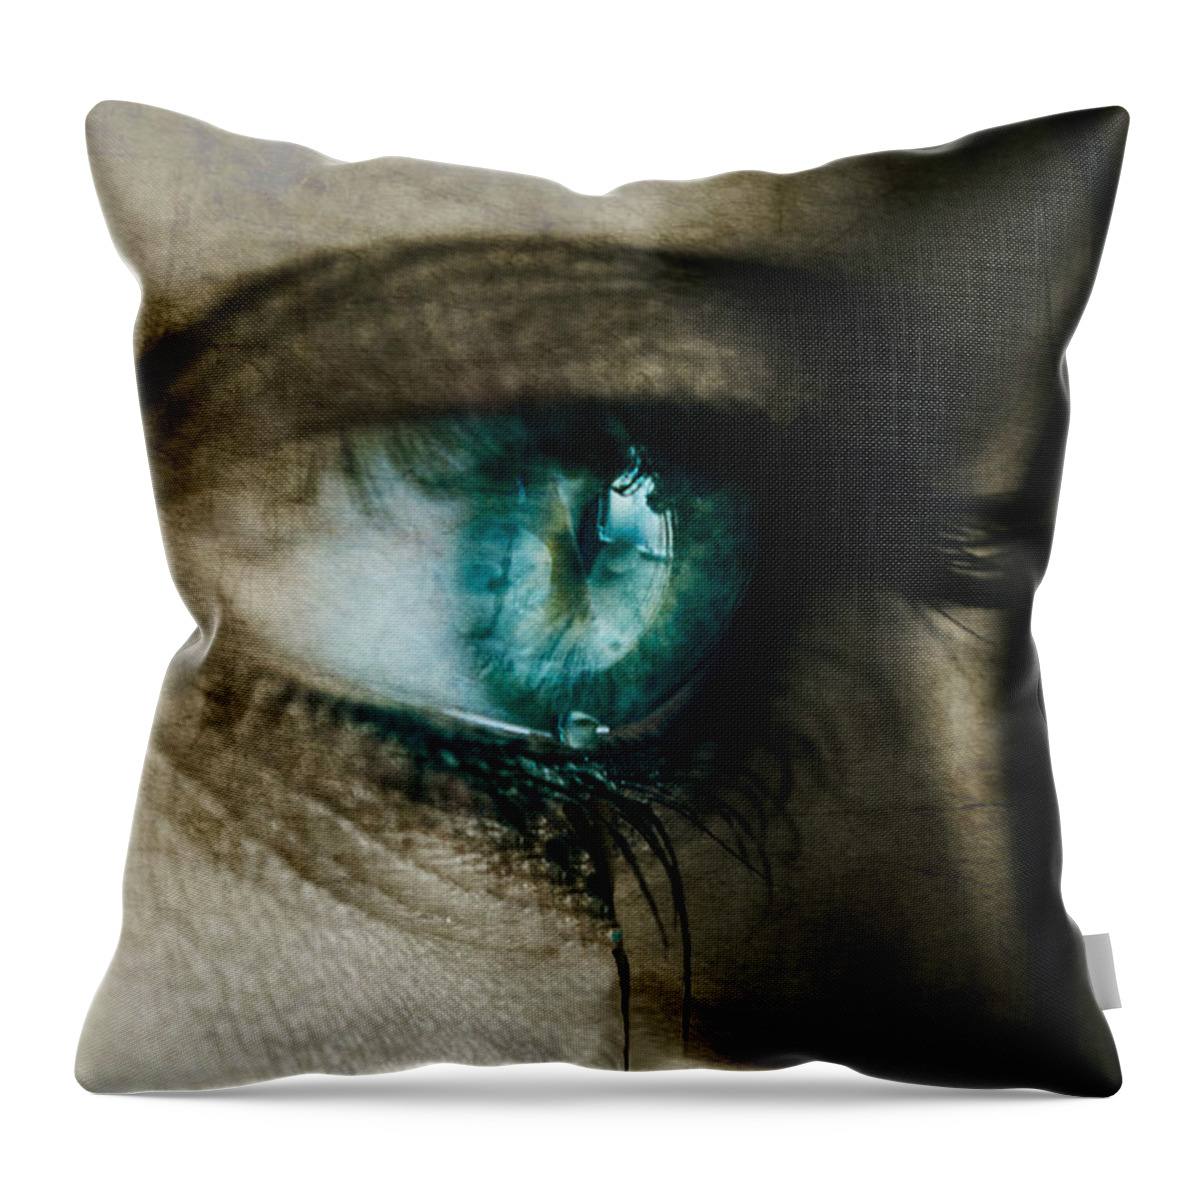 Cry Throw Pillow featuring the mixed media I Cried For You by Paul Lovering